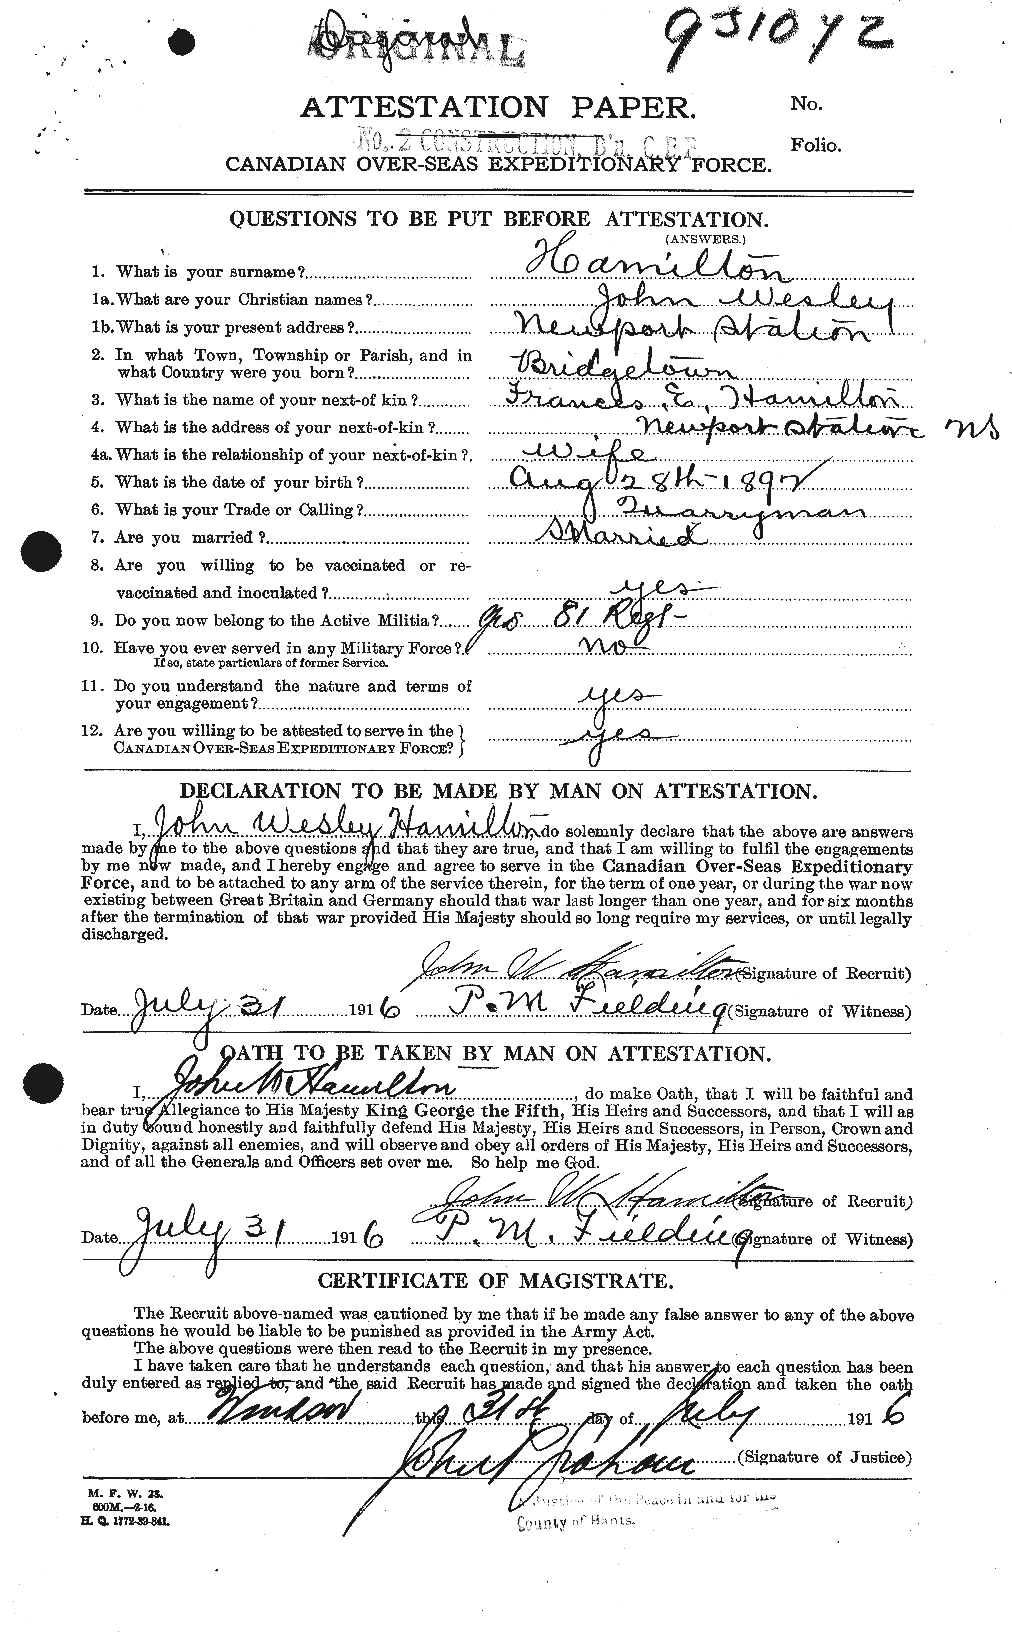 Personnel Records of the First World War - CEF 373129a